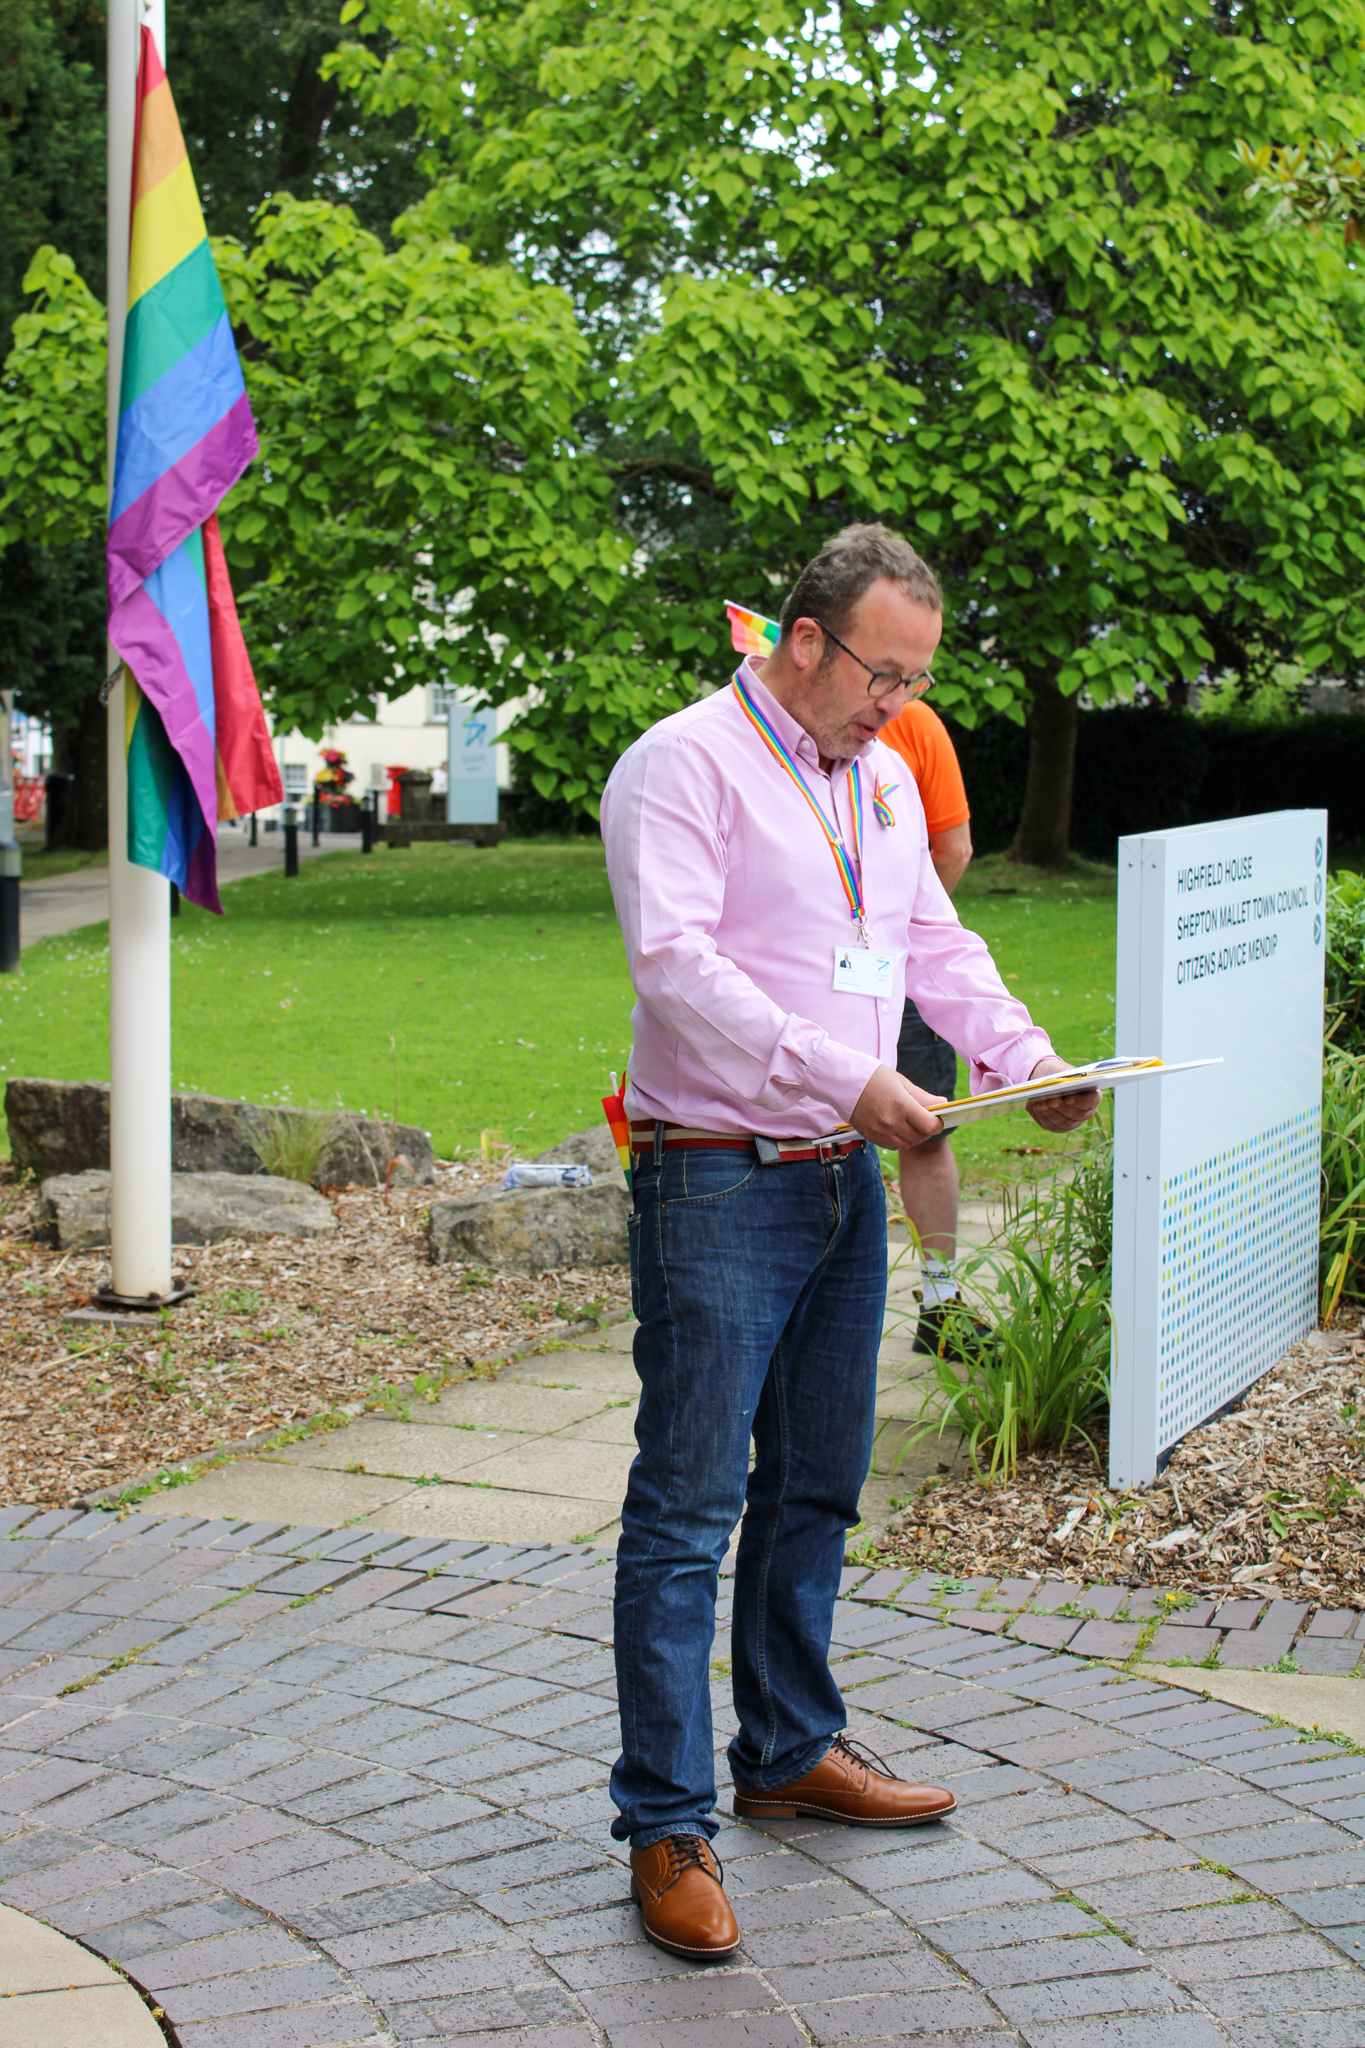 Deputy Leader, Cllr Barry O'Leary delivers a personal speech on what Pride means to him